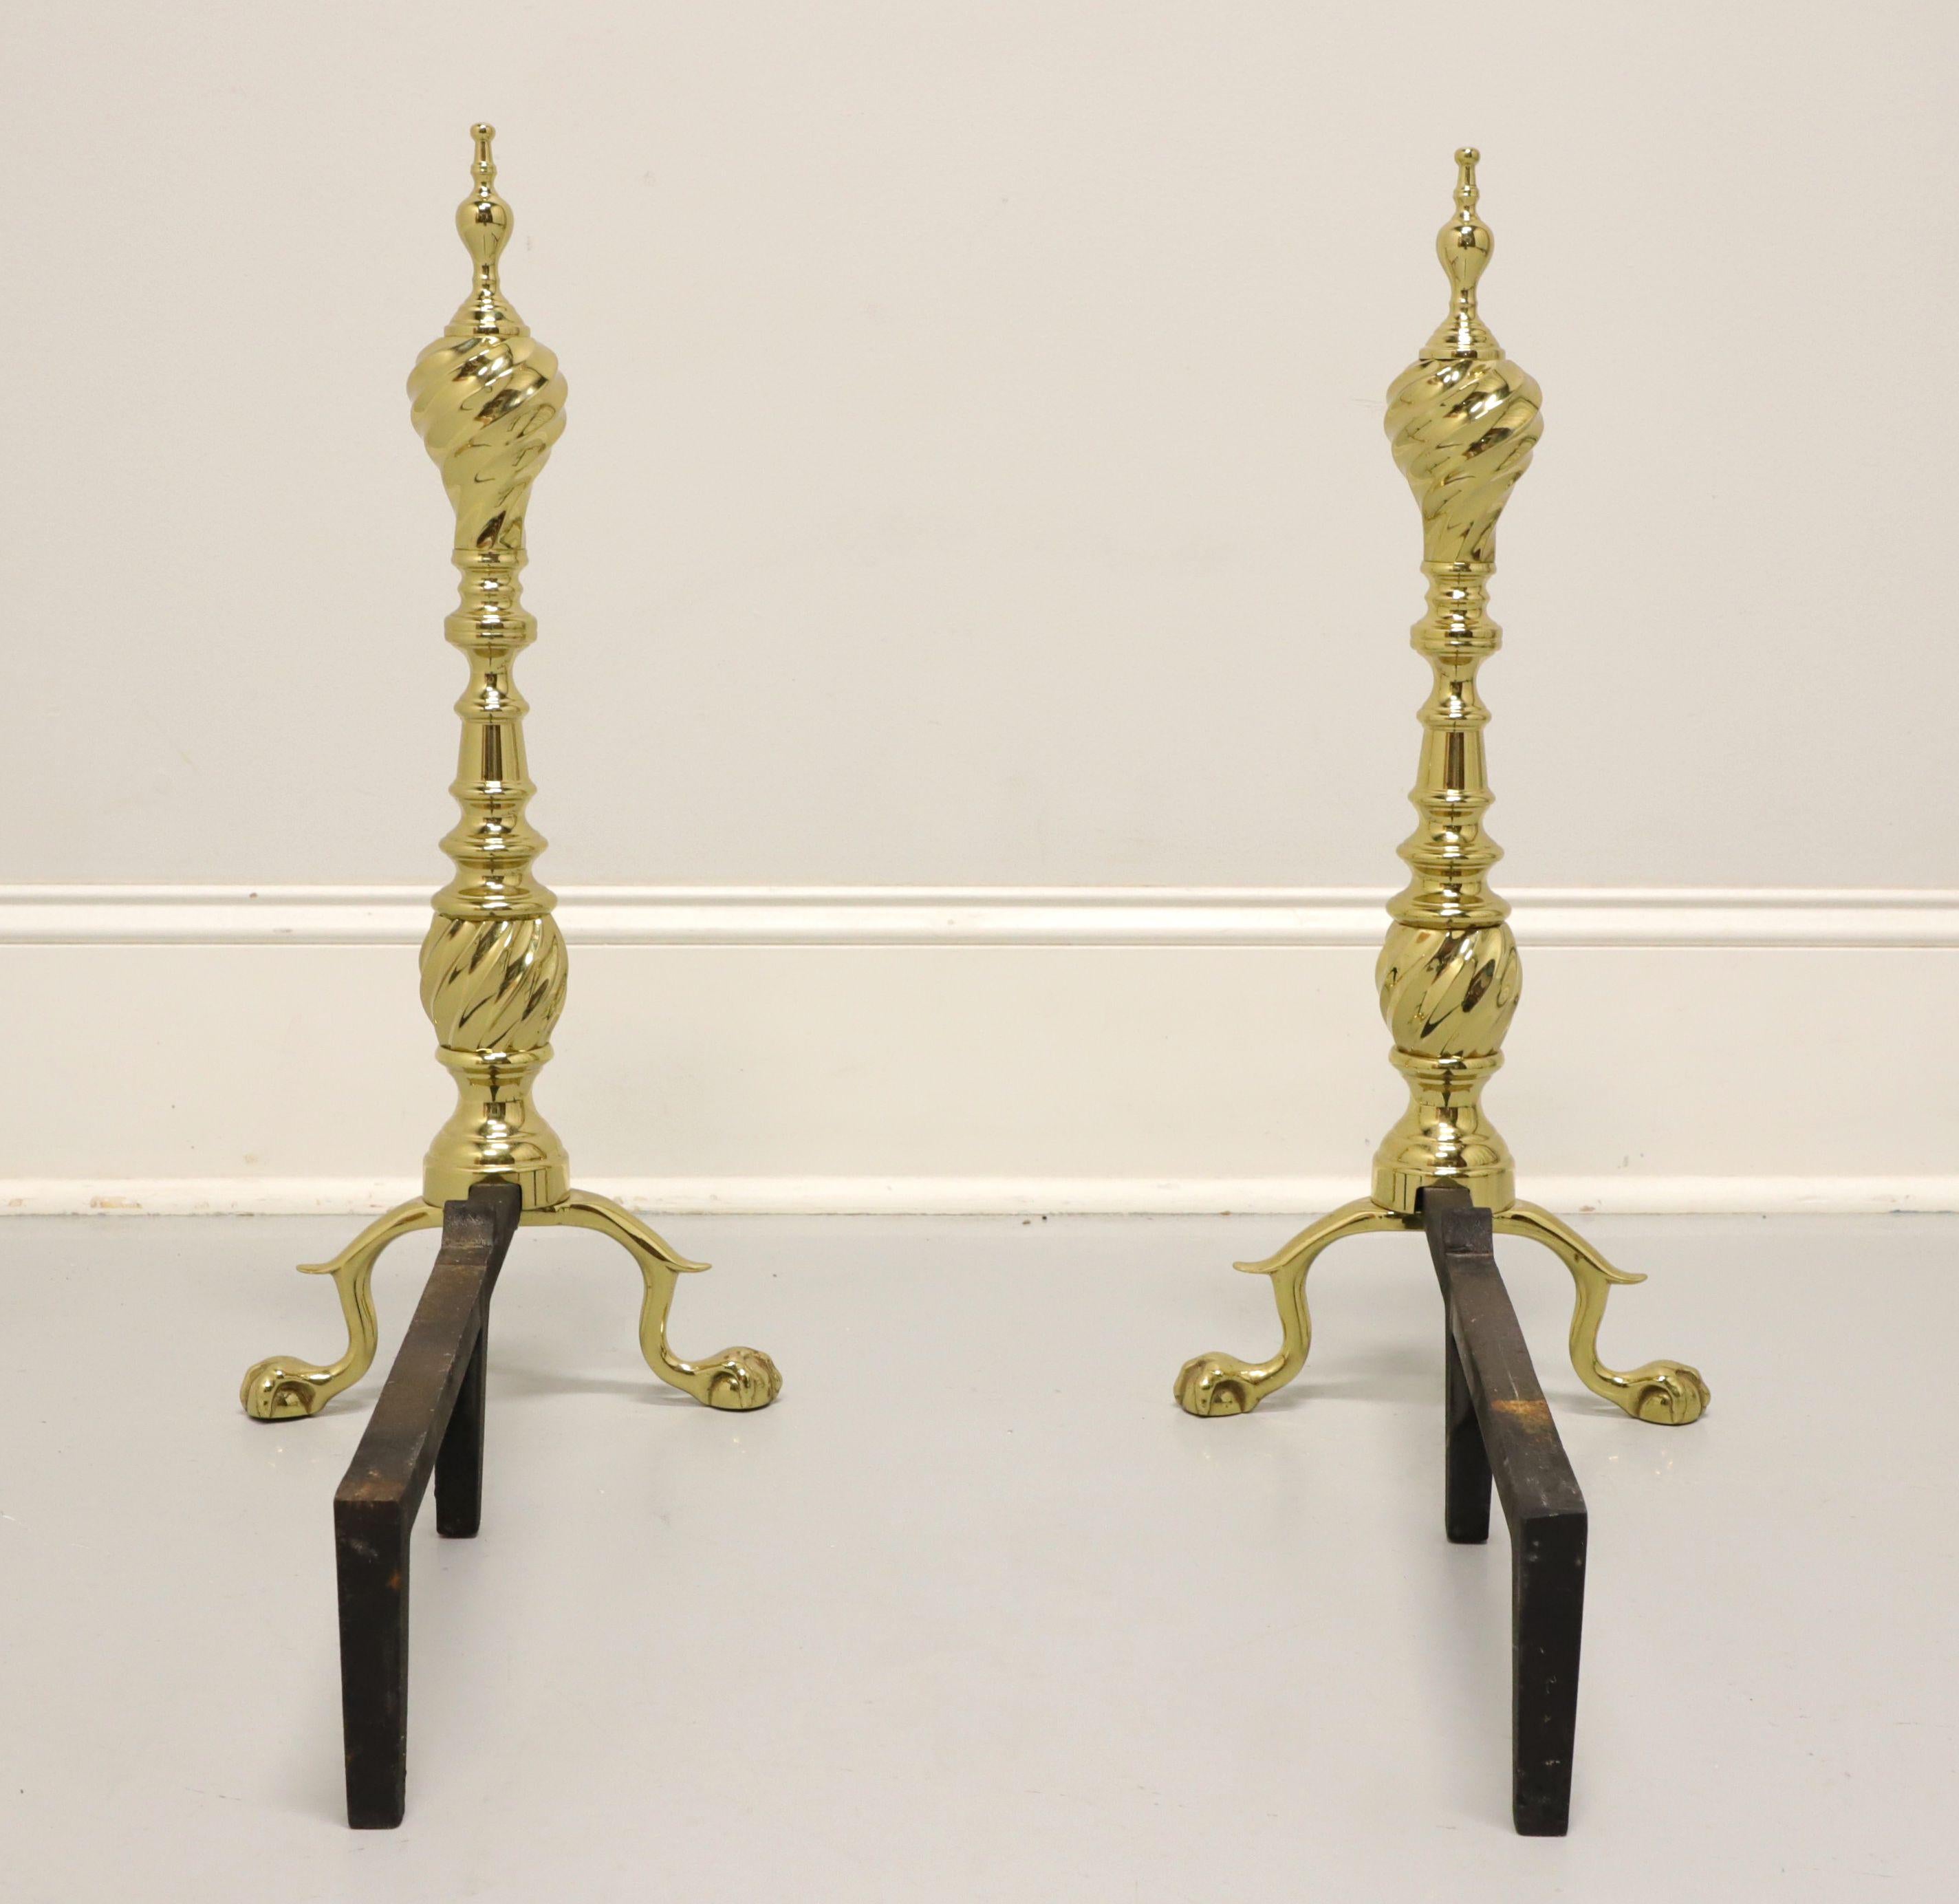 American VIRGINIA METALCRAFTERS Middleton House Brass & Metal Fireplace Andirons - A For Sale